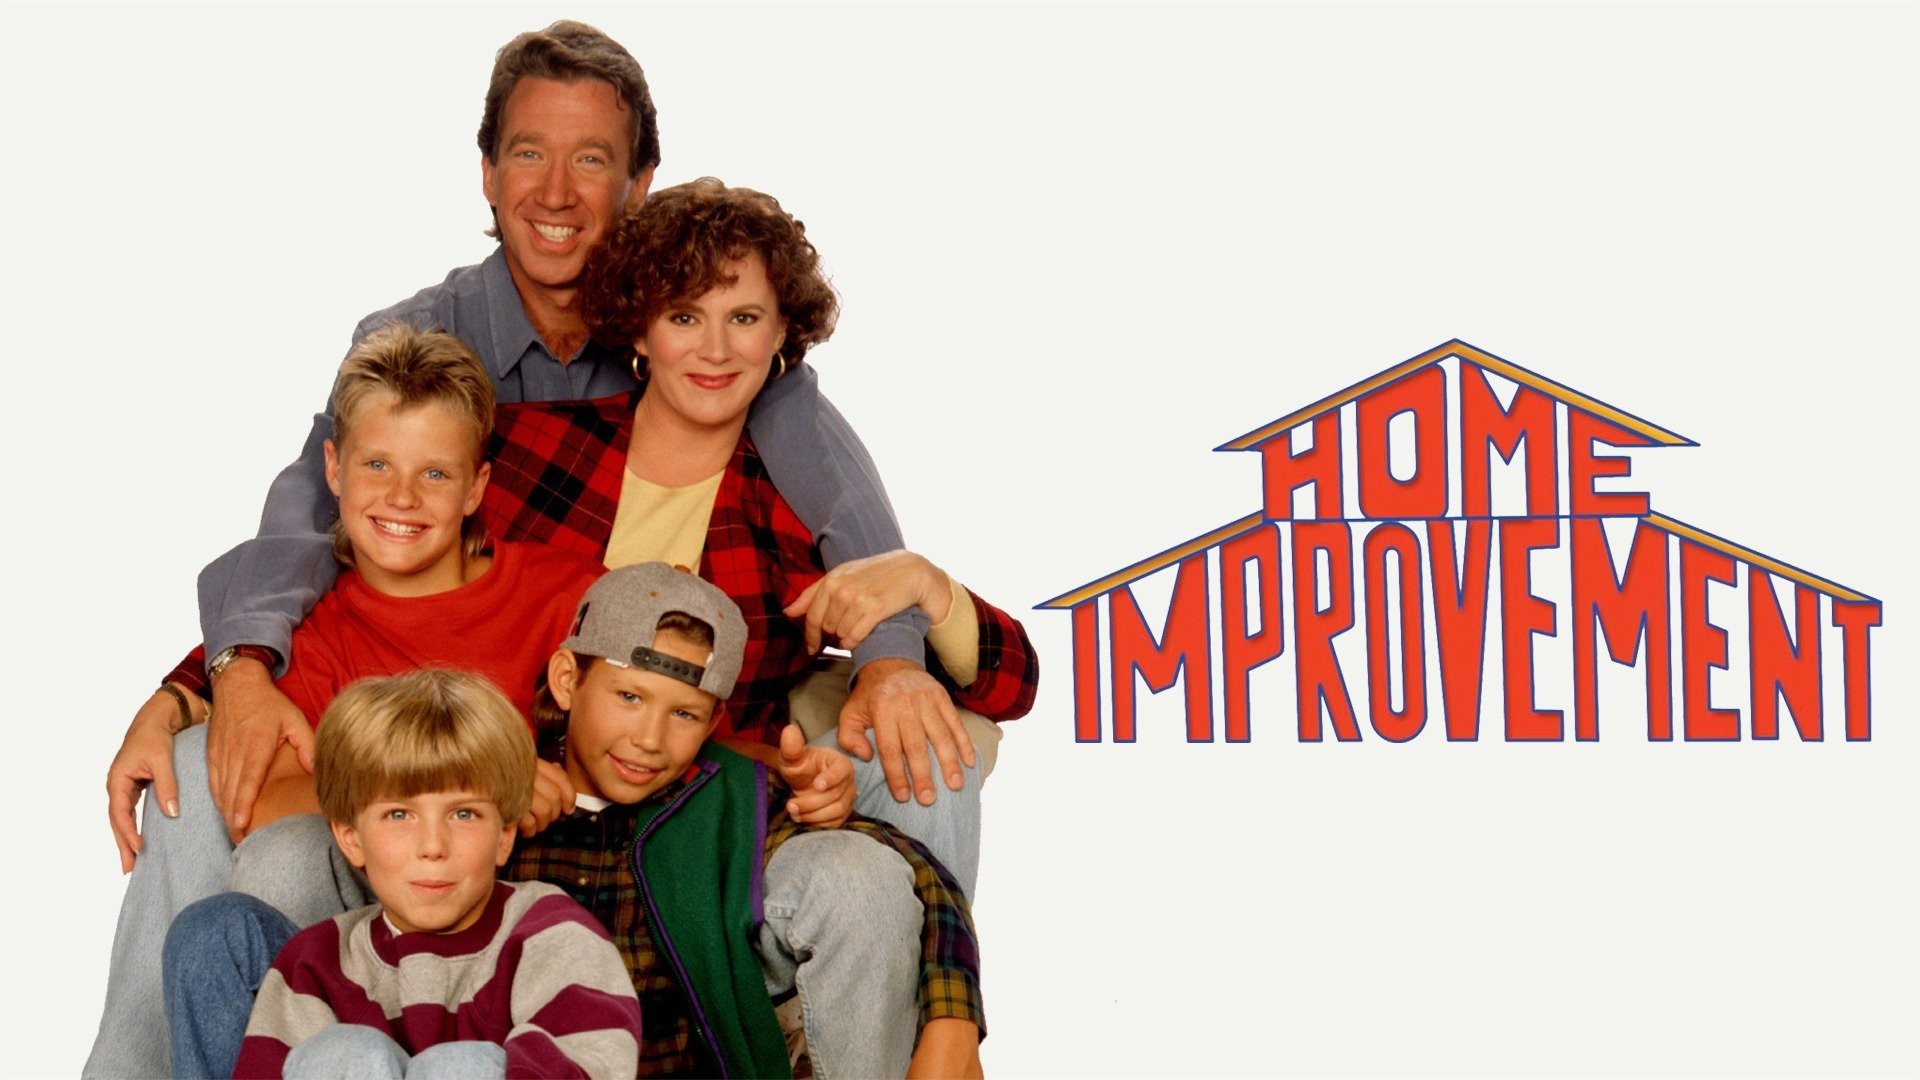 In the U.S. TV series Home Improvement, what was the name of the